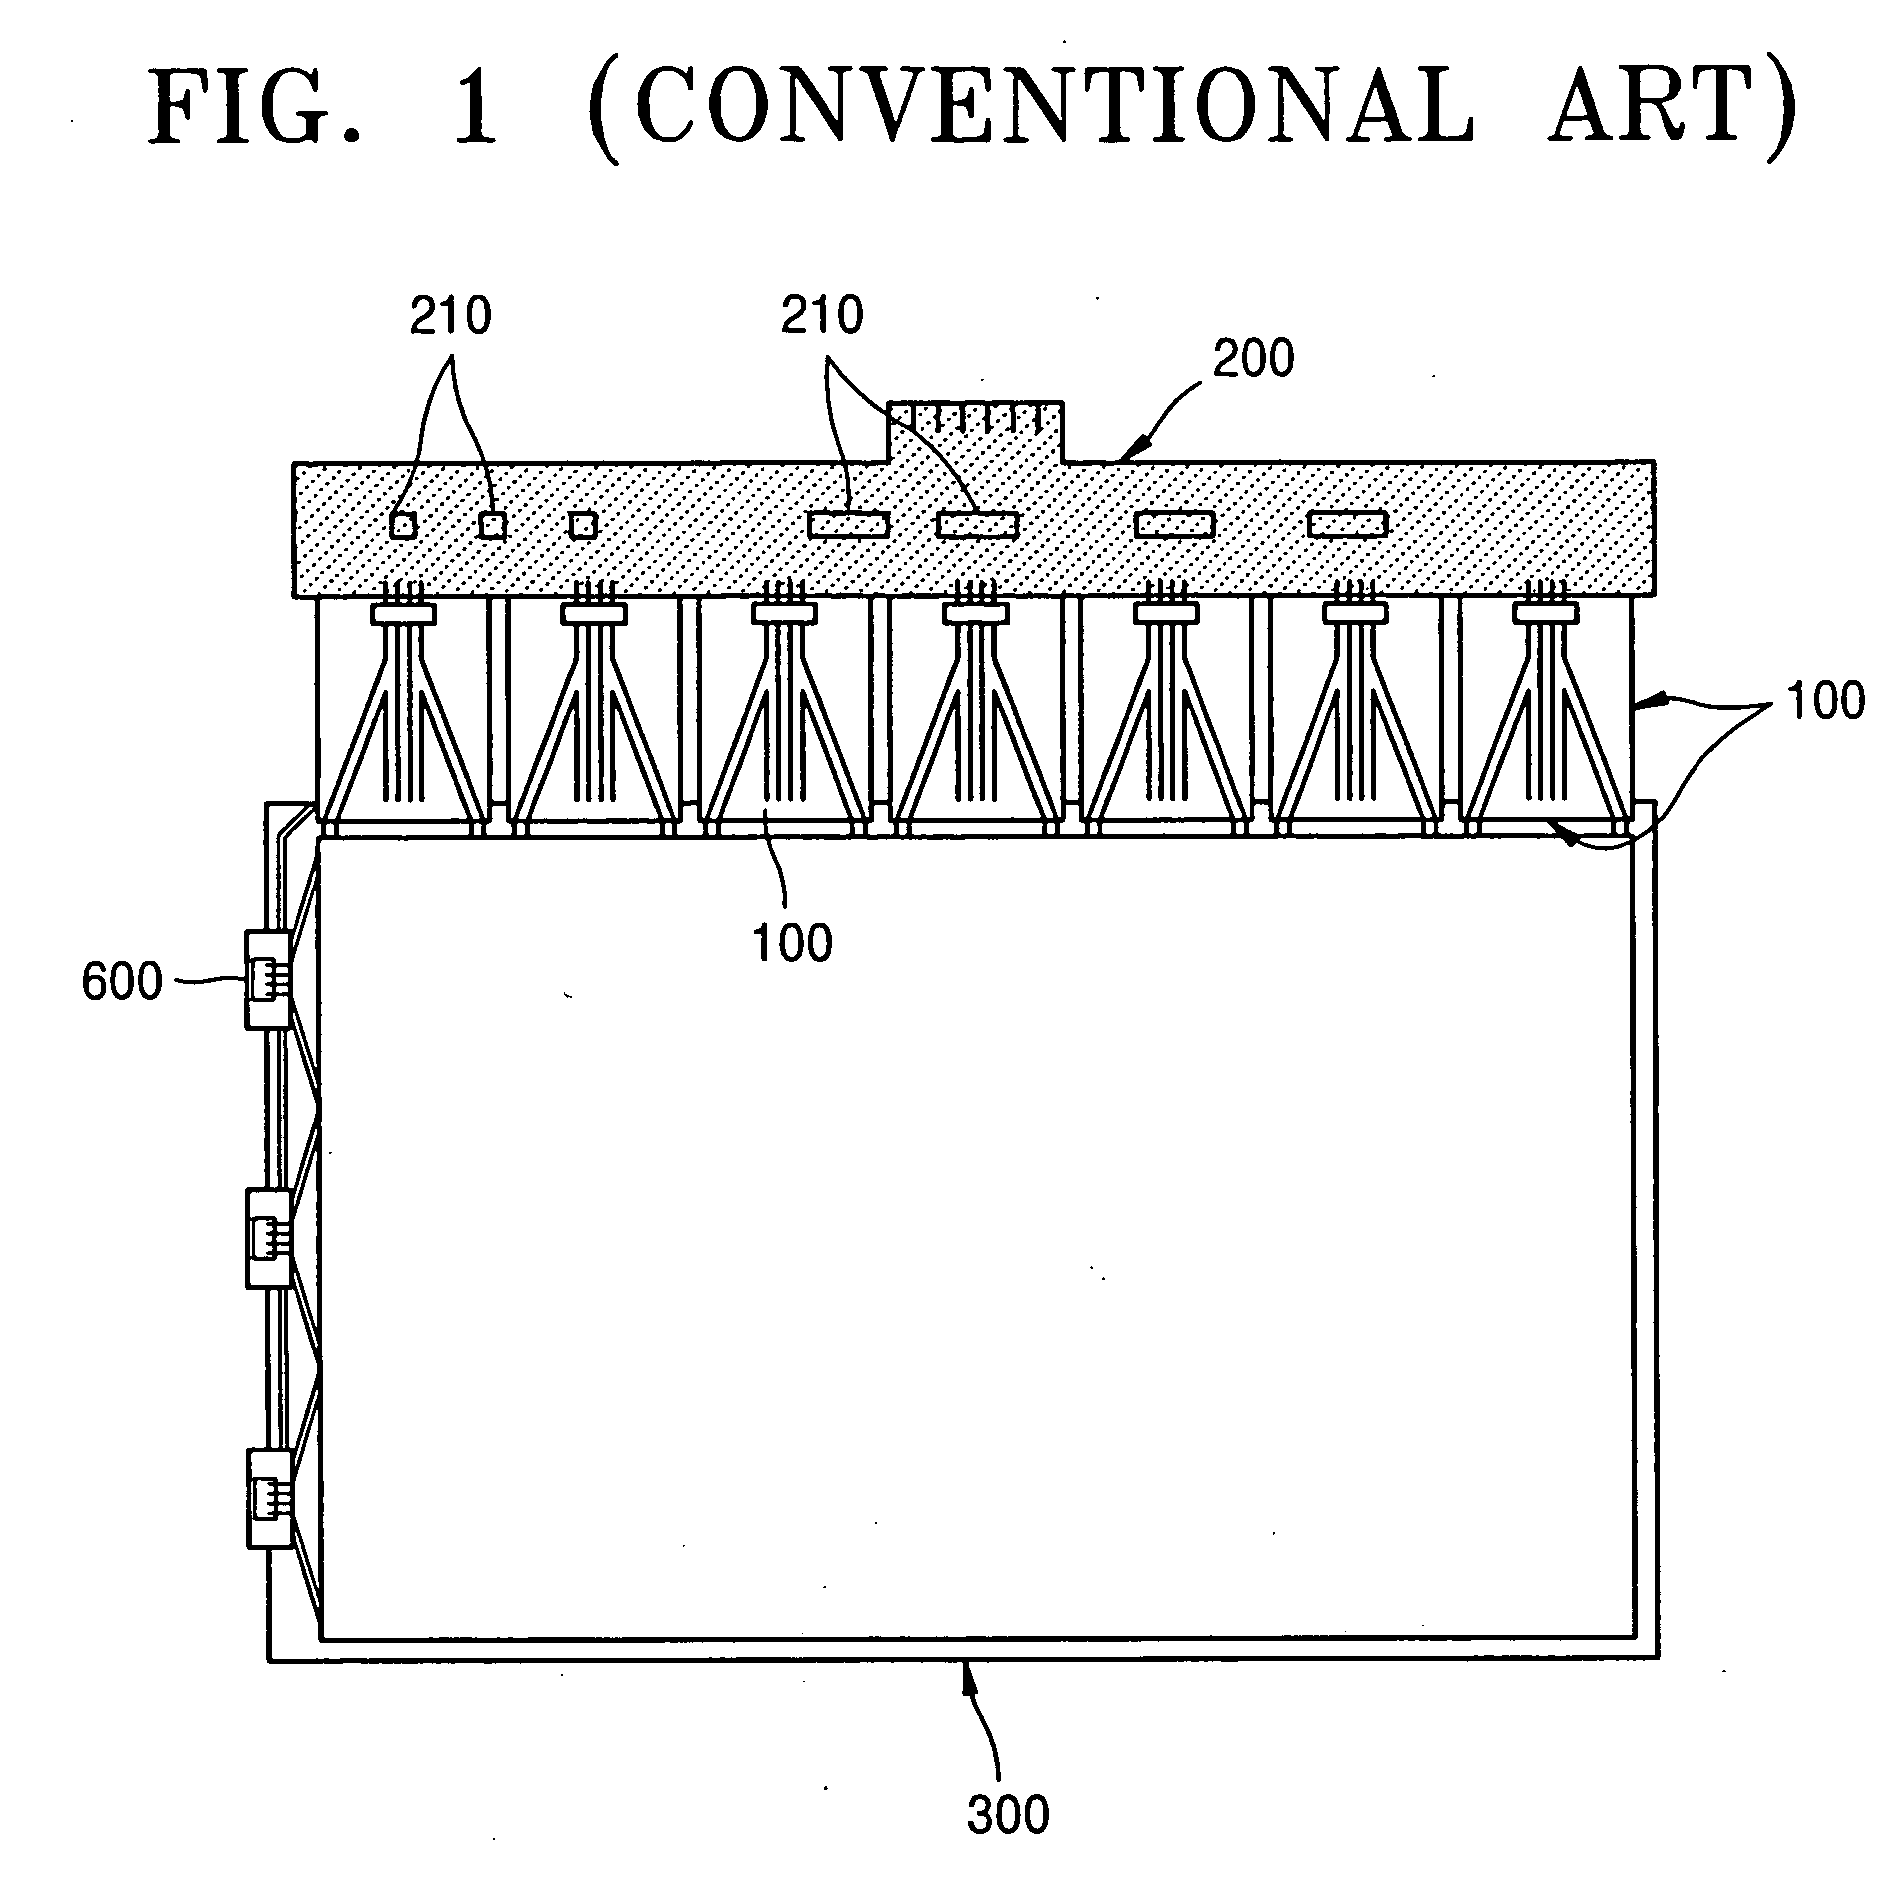 Low-cost flexible film package module and method of manufacturing the same